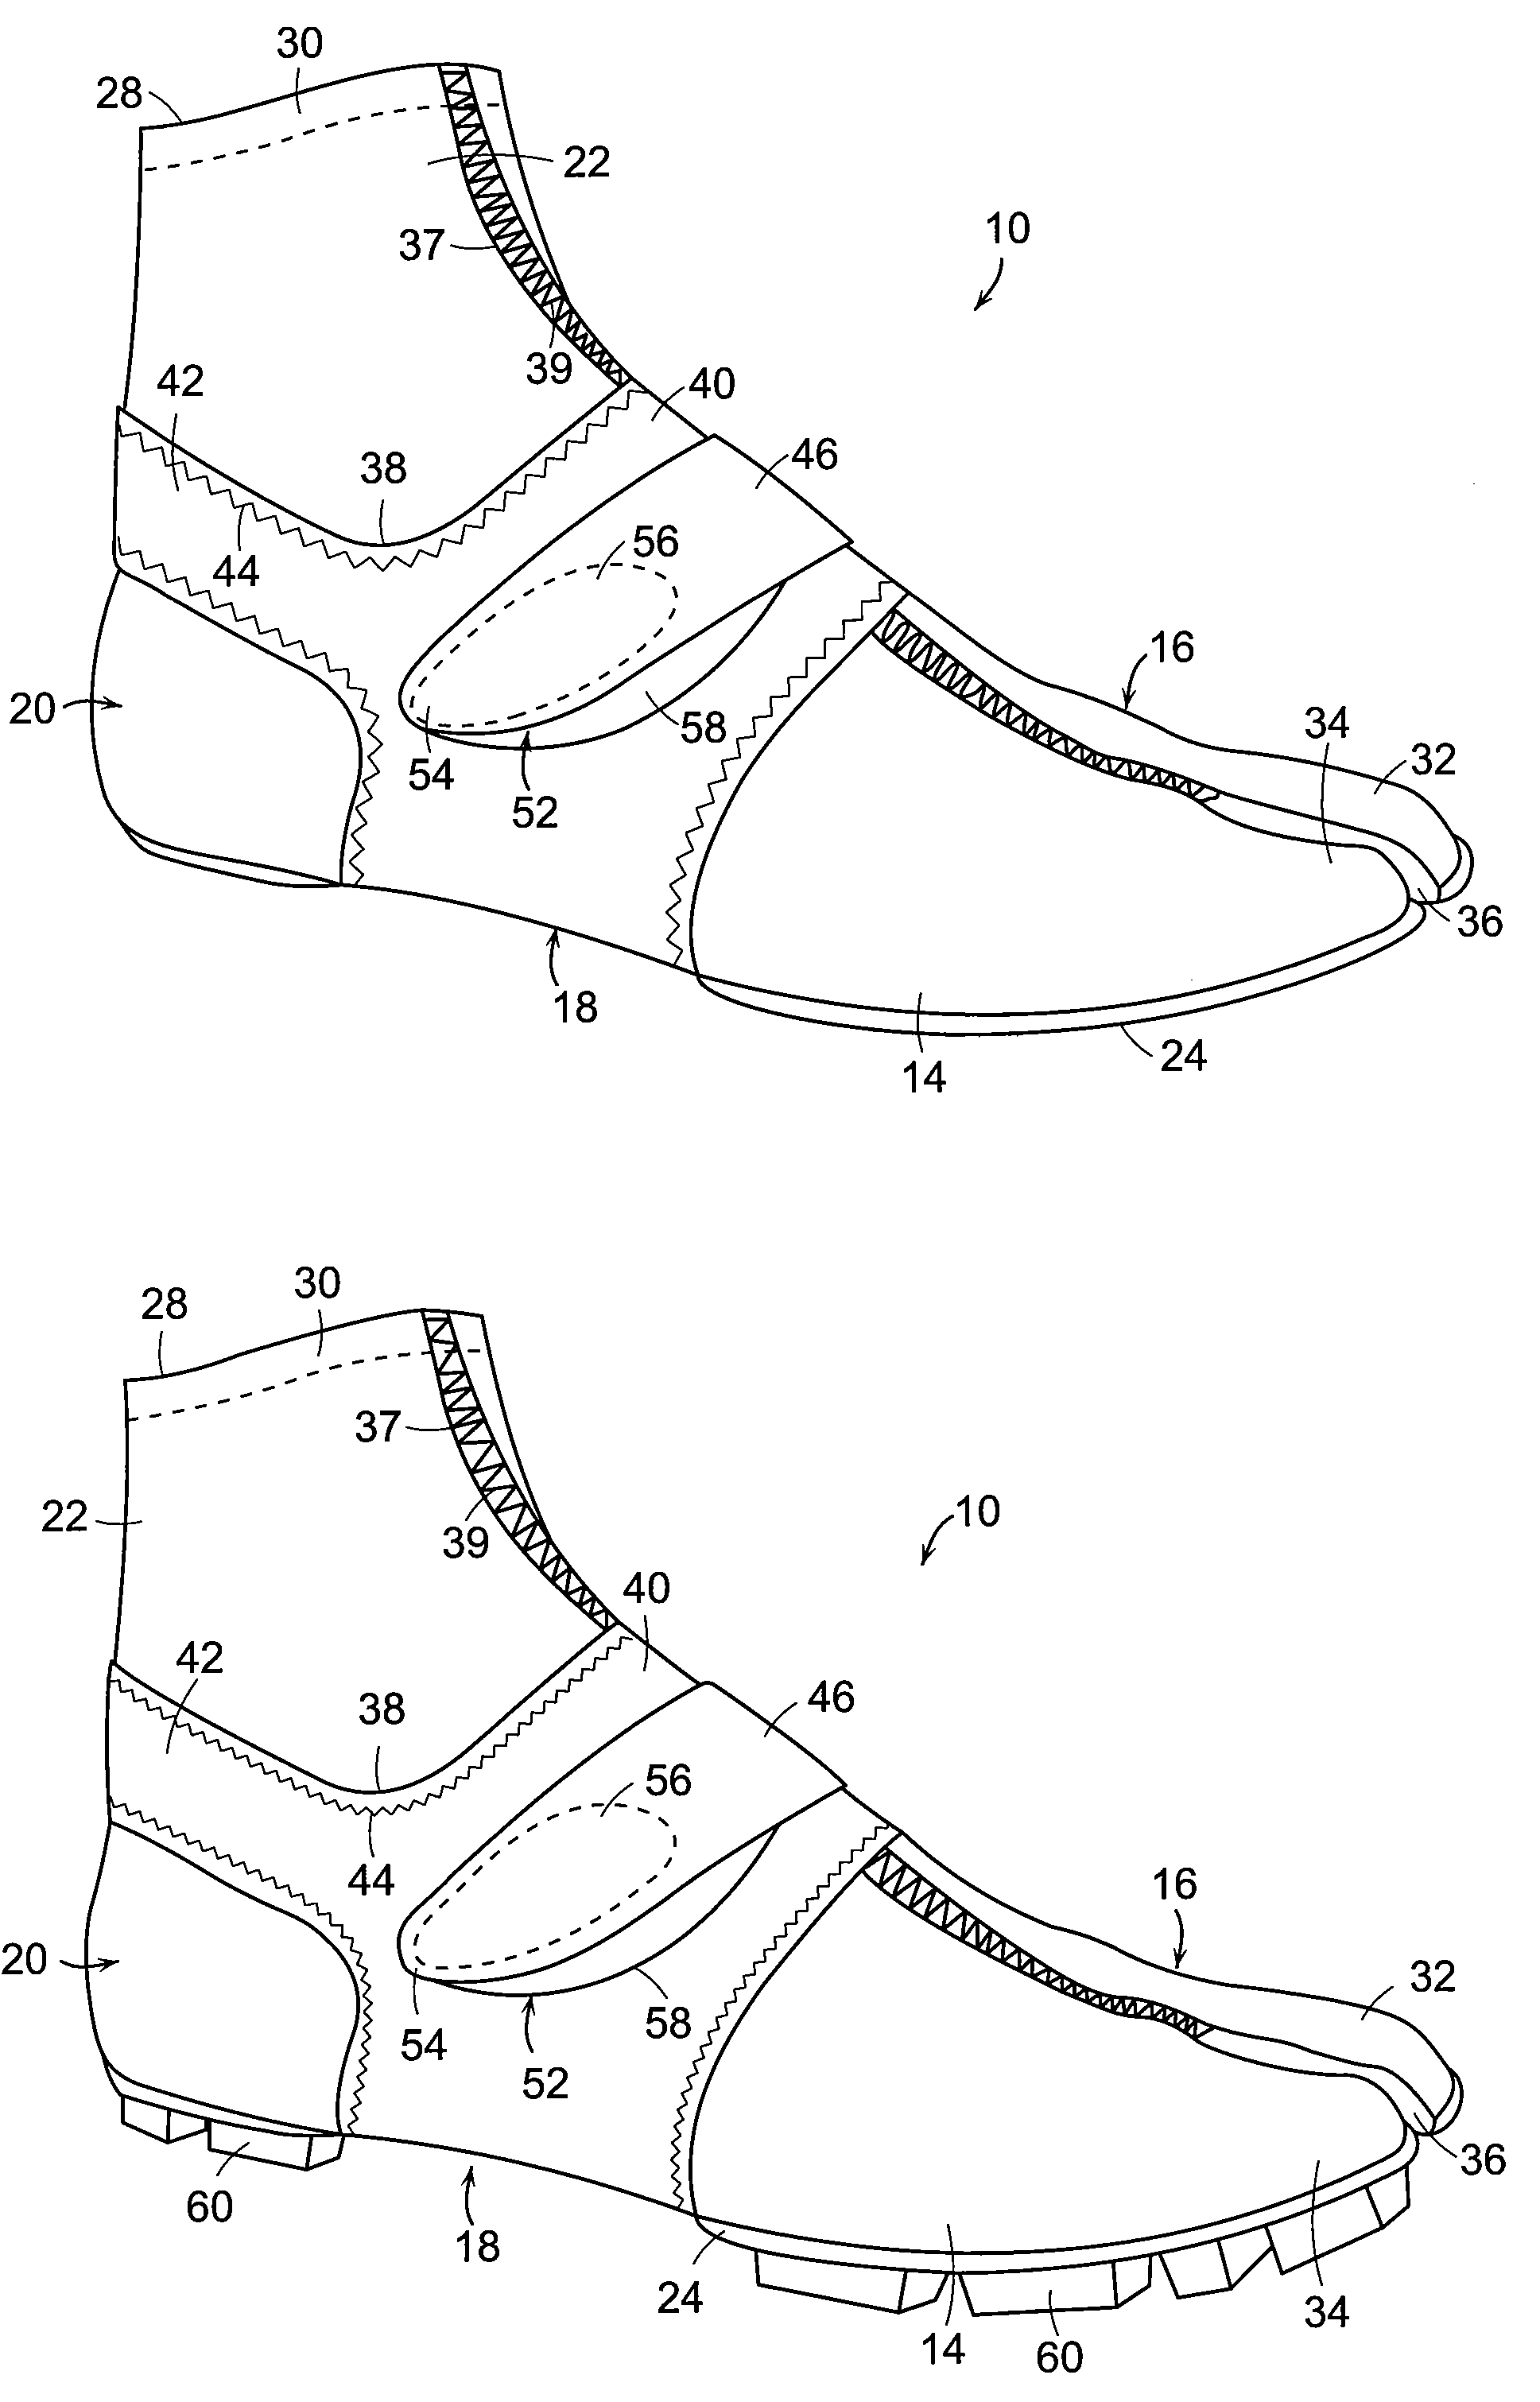 Article of footwear for sand sports